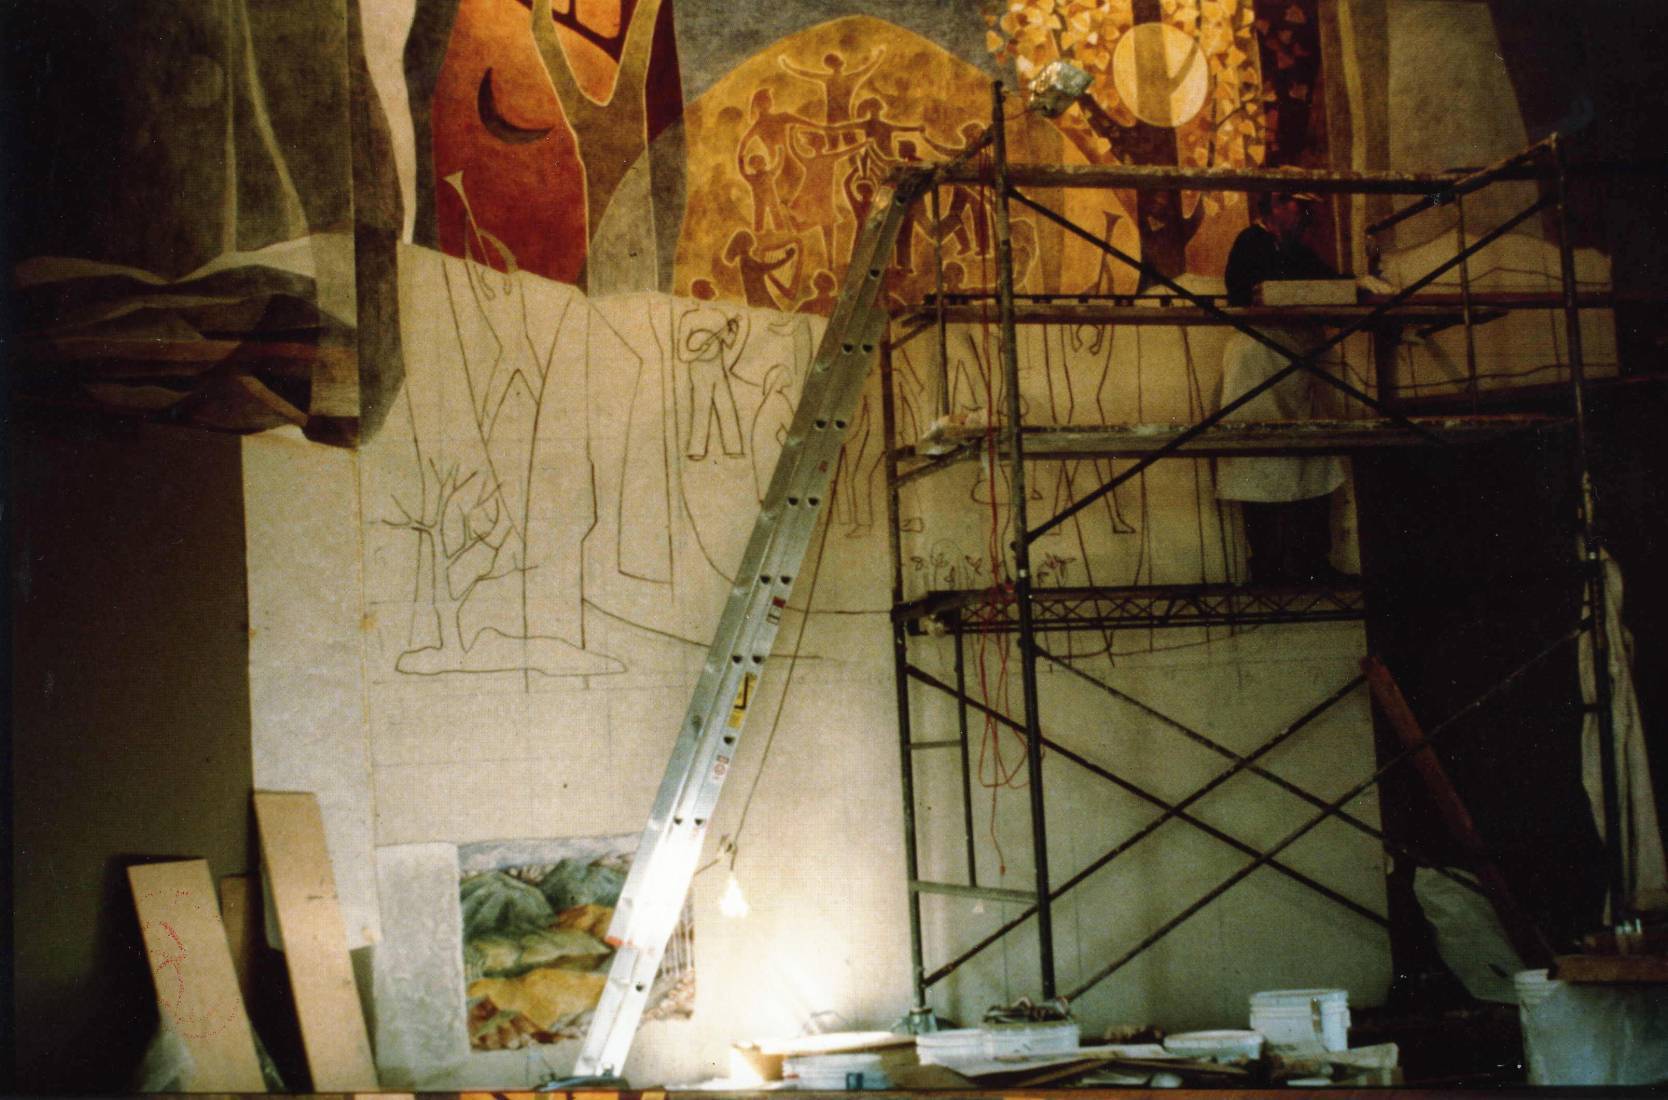 ill. Lucienne Bloch painting in First Presbyterian Church, Sheridan WY, 1979